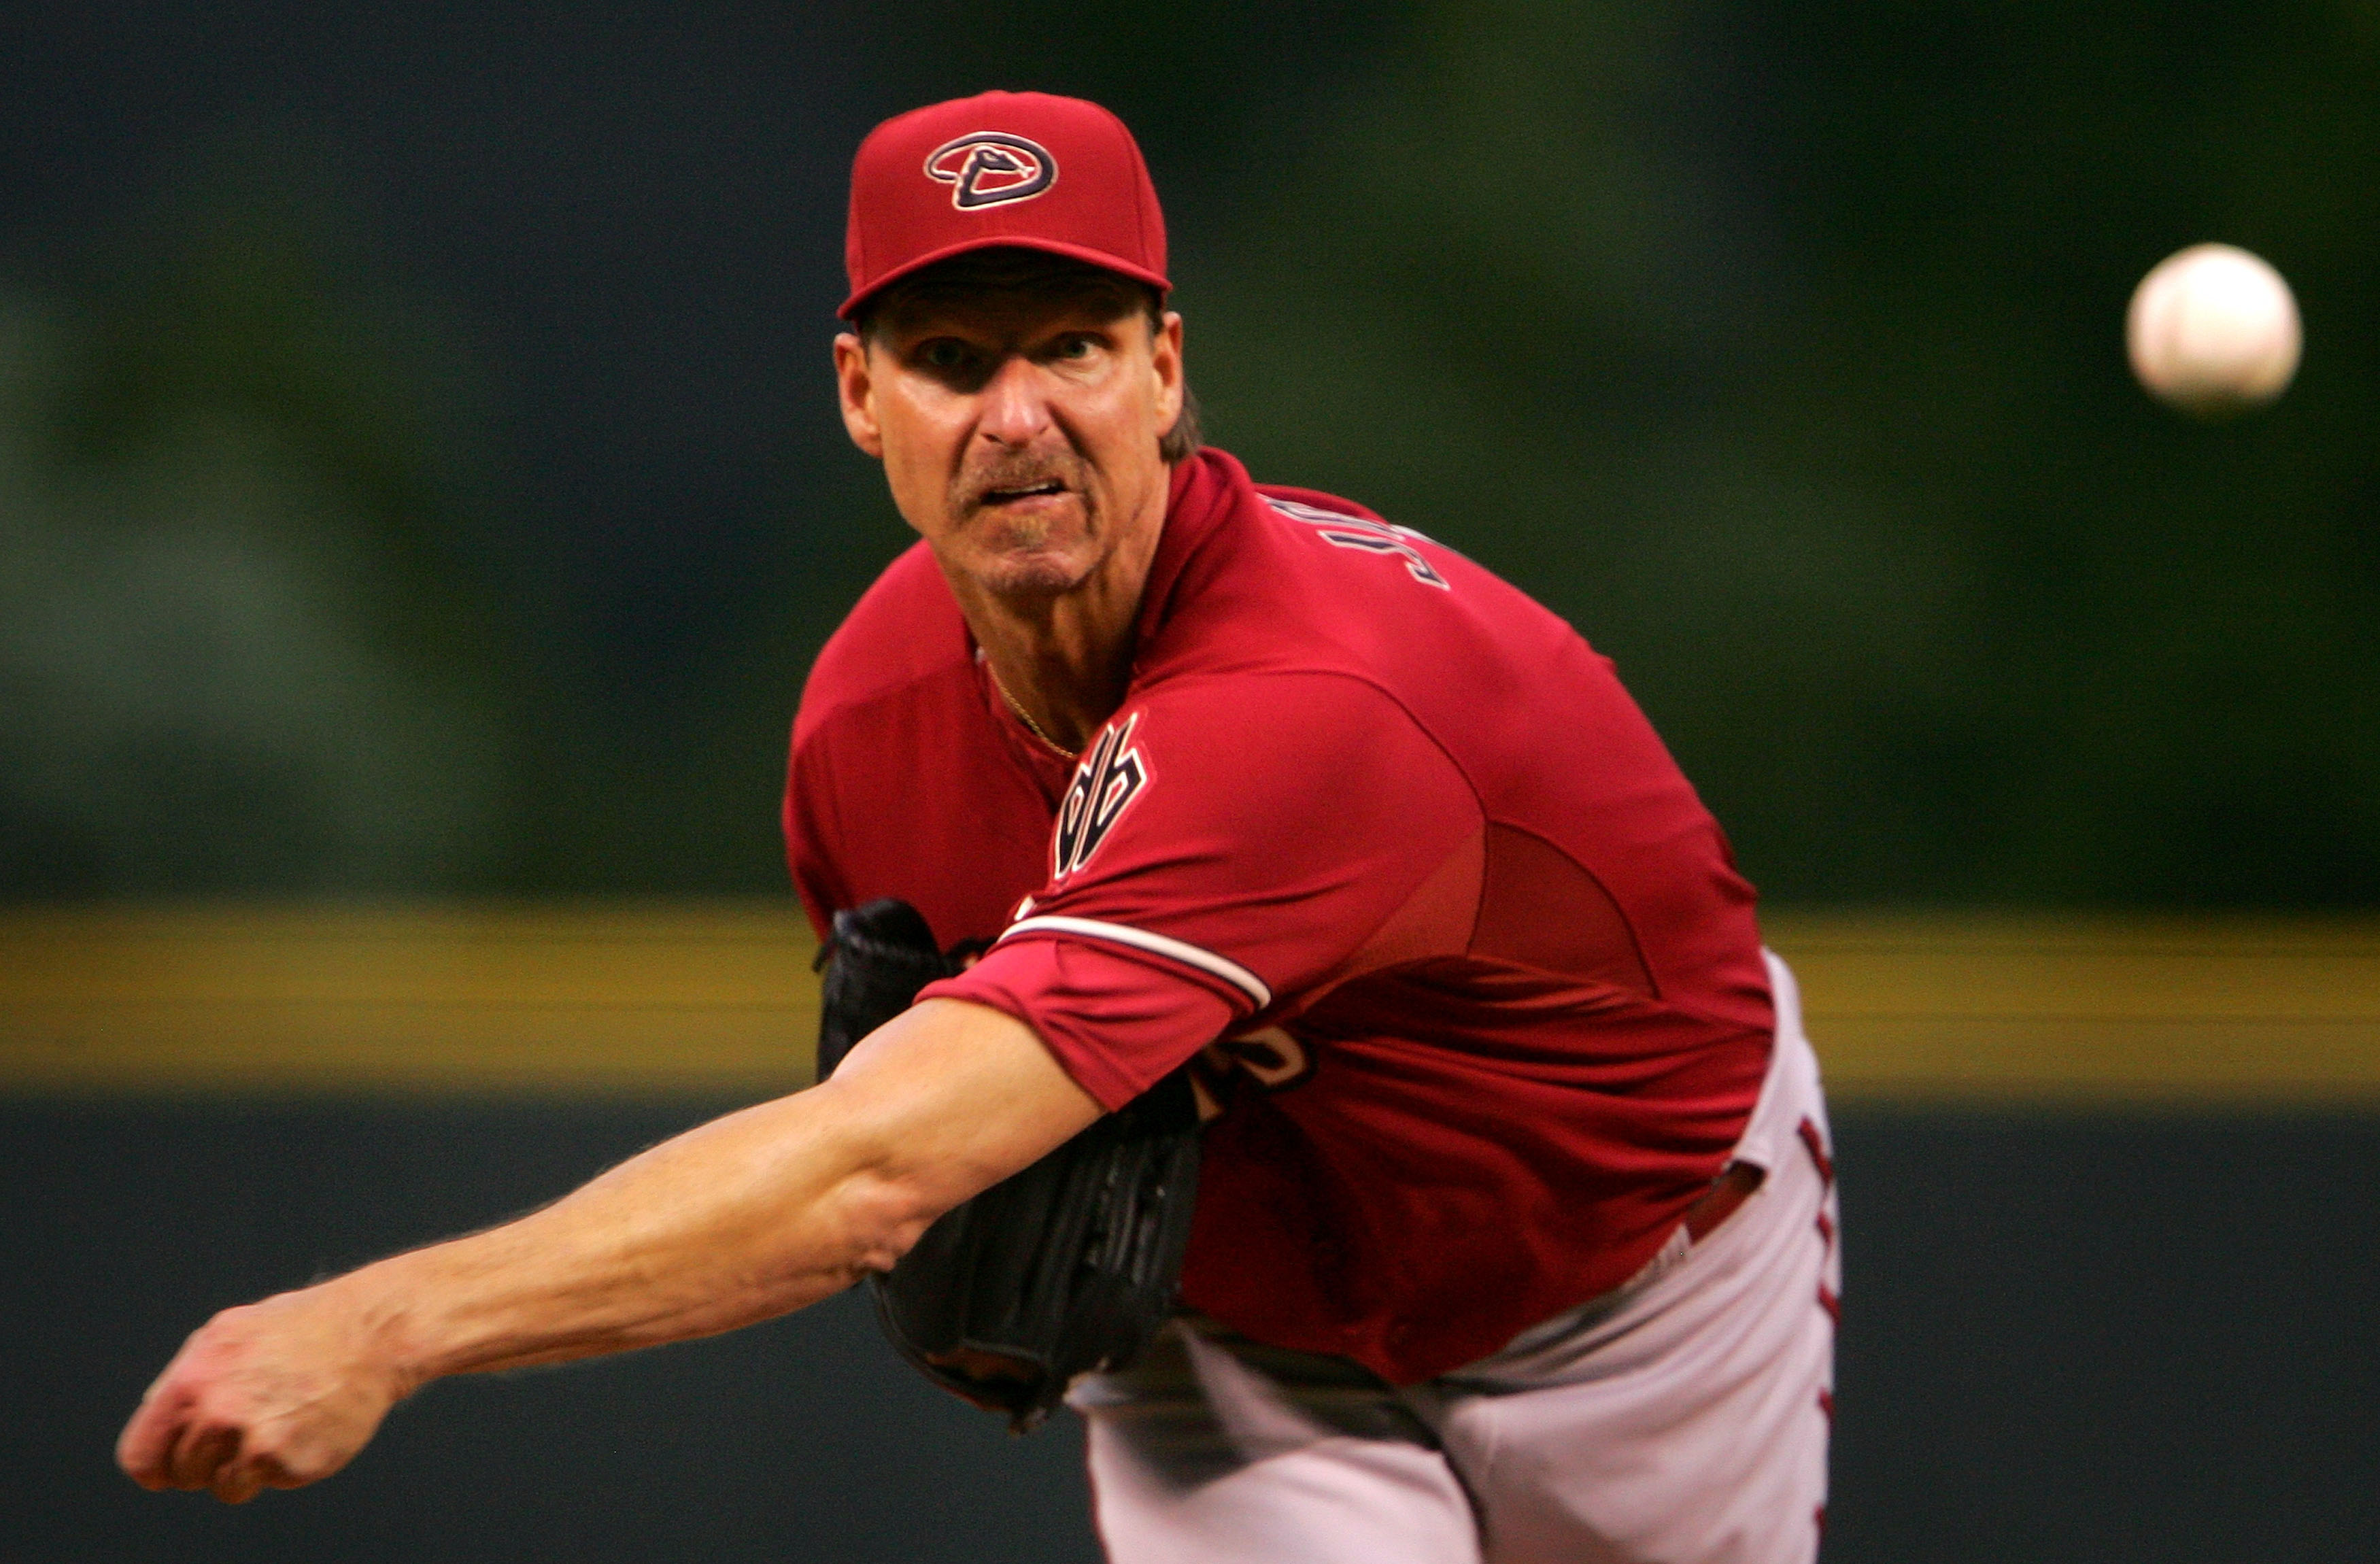 DENVER - MAY 15:  Starting pitcher Randy Johnson #51 of the Arizona Diamondbacks delivers against the Colorado Rockies on May 15, 2007 at Coors Field in Denver, Colorado.  (Photo by Doug Pensinger/Getty Images)